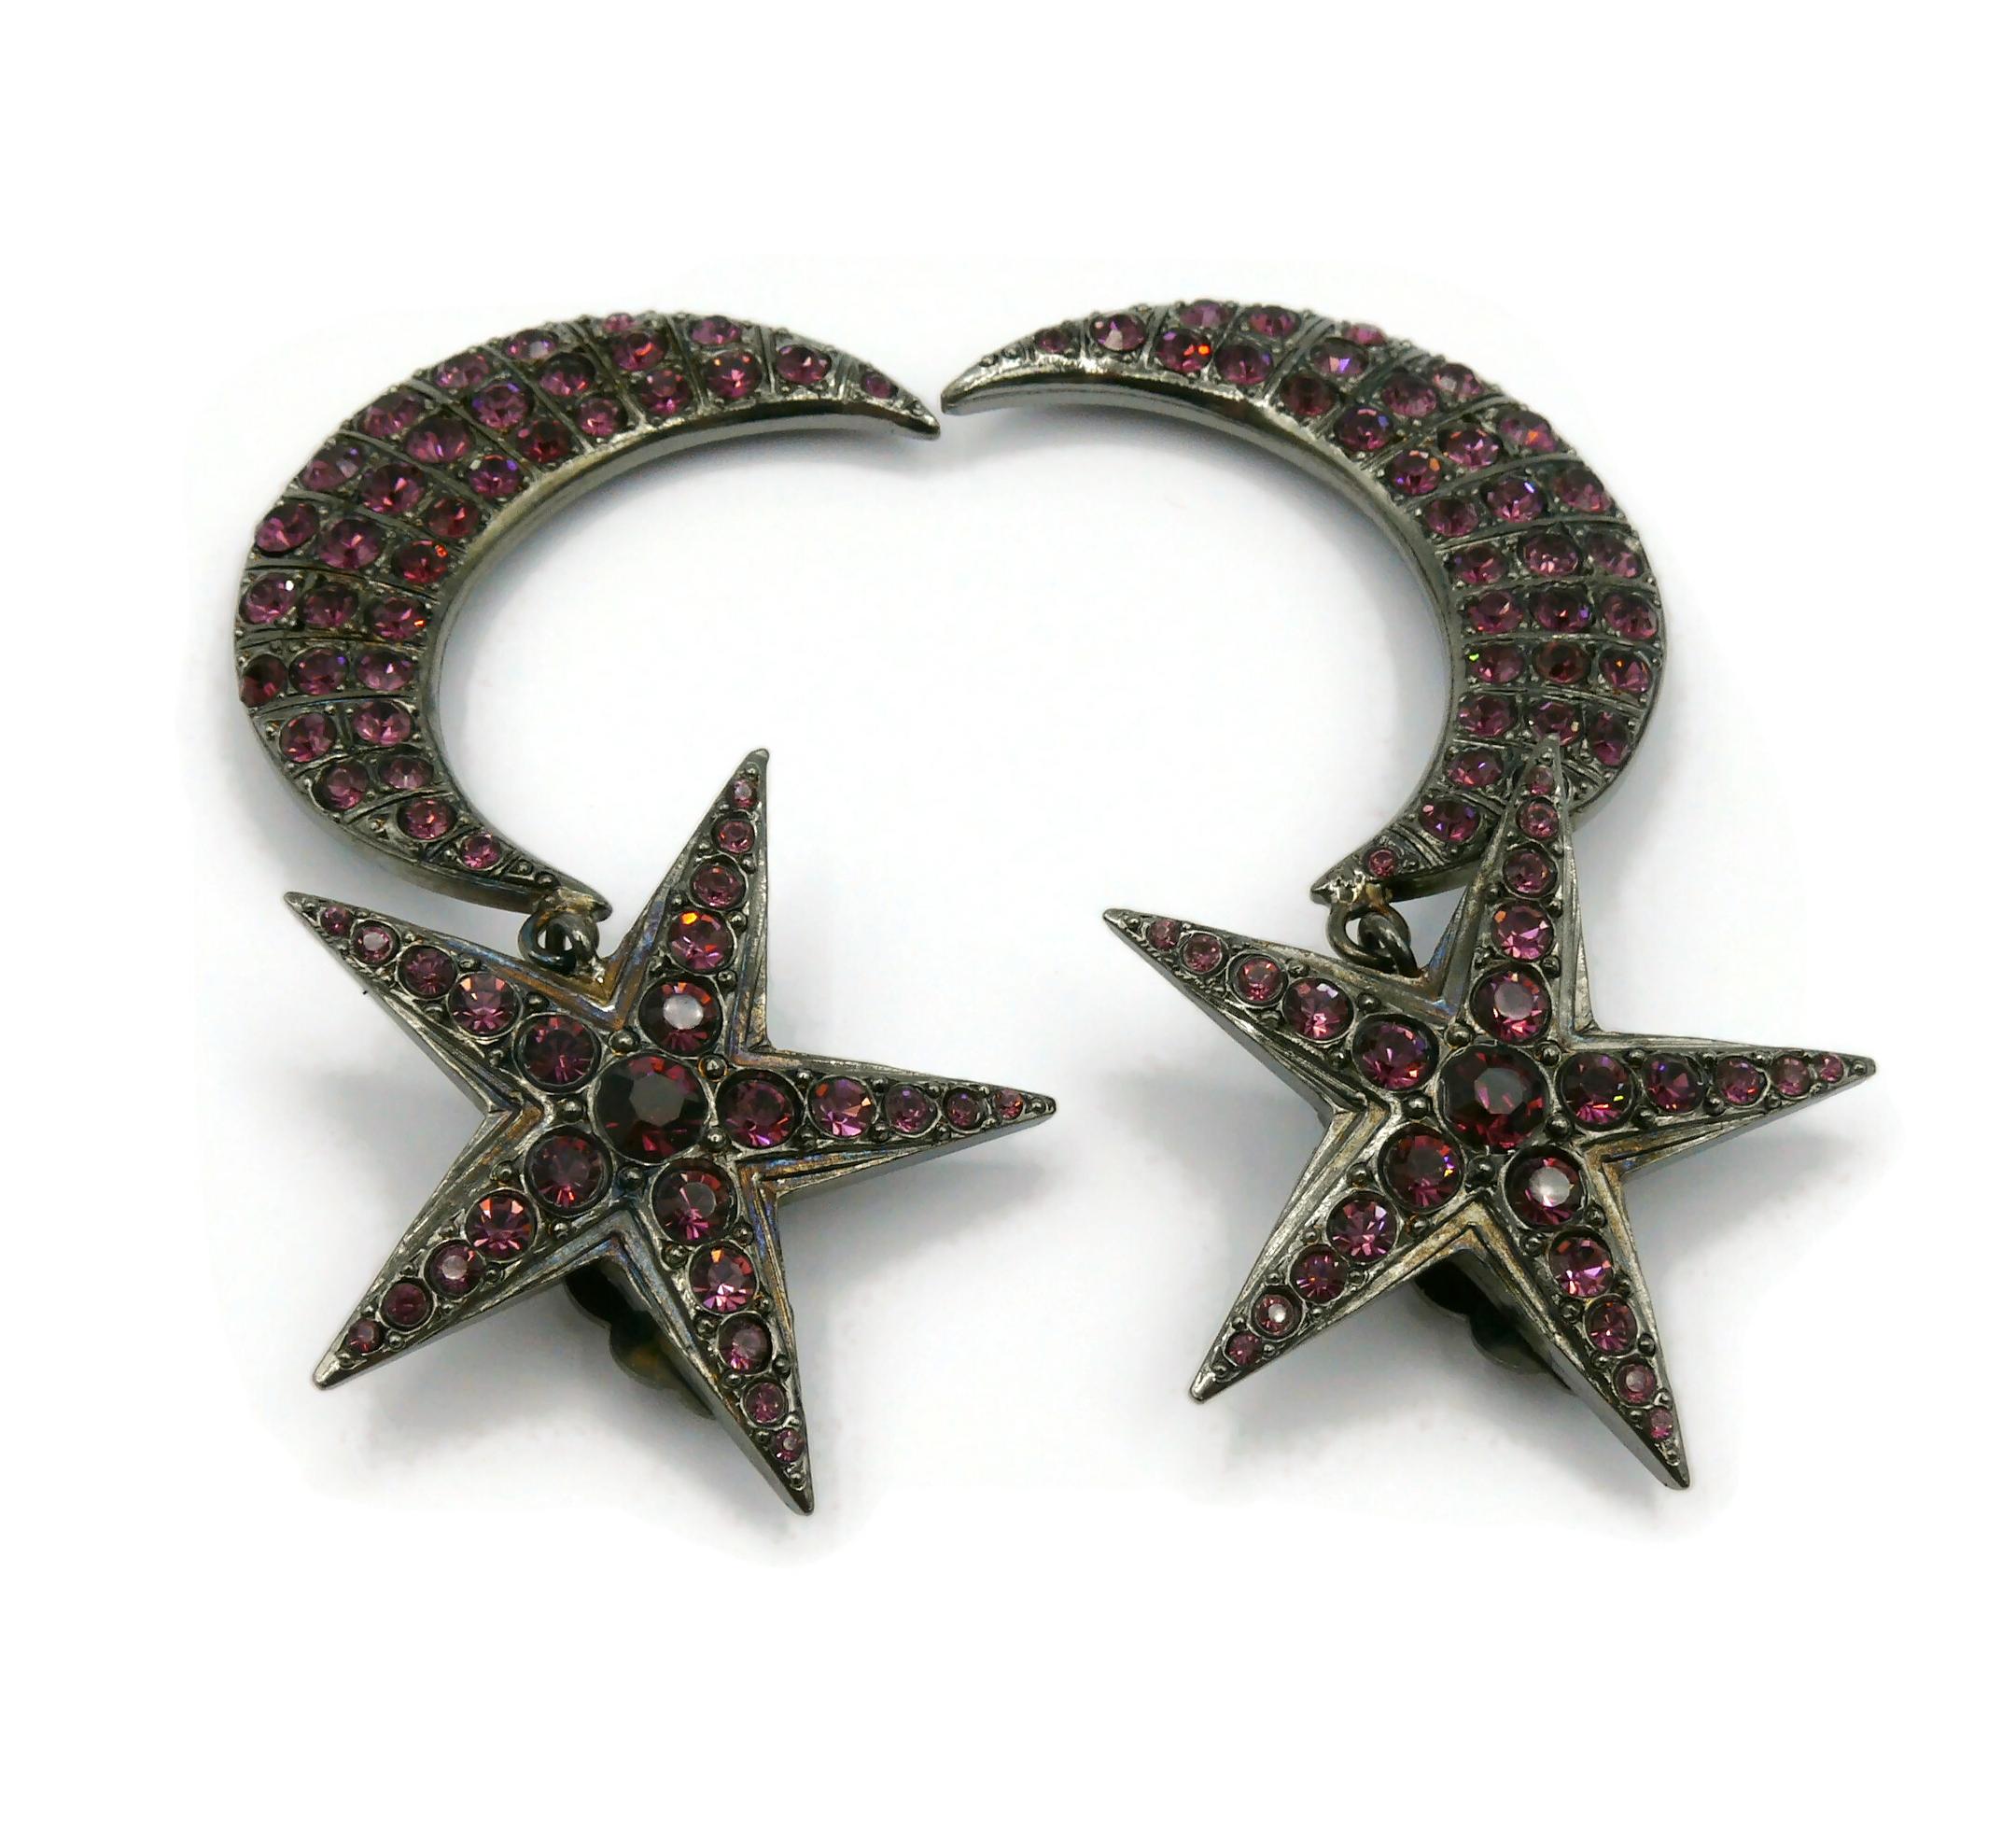 JEAN PAUL GAULTIER Vintage Jewelled Star and Crescent Moon Dangling Earrings In Excellent Condition For Sale In Nice, FR